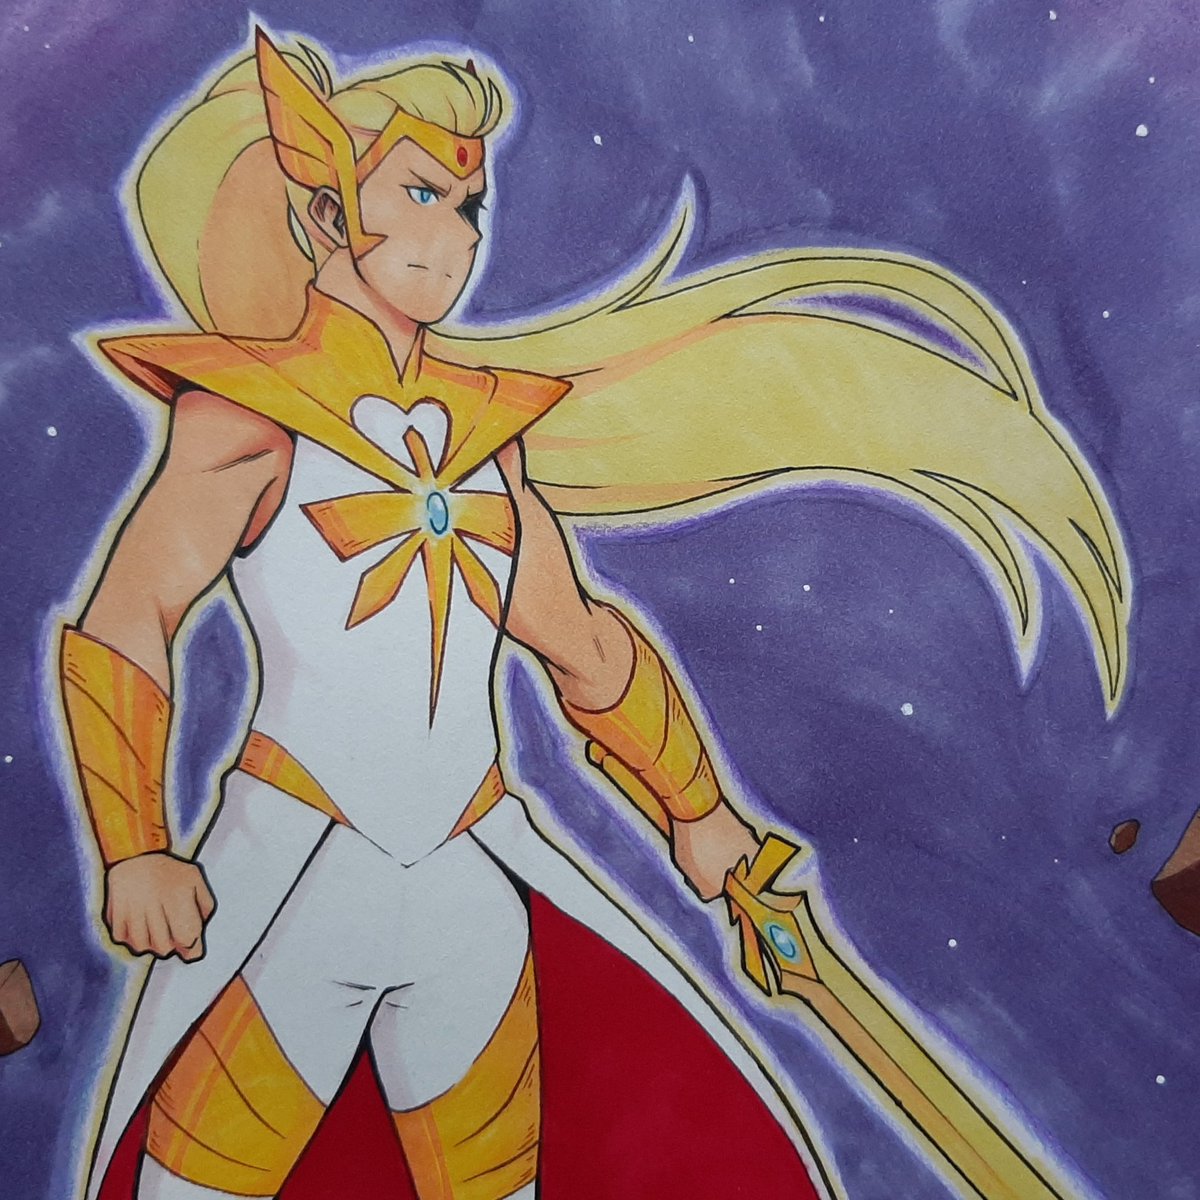 In 2018 I made a fanart of She-Ra after seeing season one. Two years later the series came to it's last season, and it's time to do this again.
______________
#SheRa #SheRaSeason5 #SheRaSpoliers #sheraS5spoilers